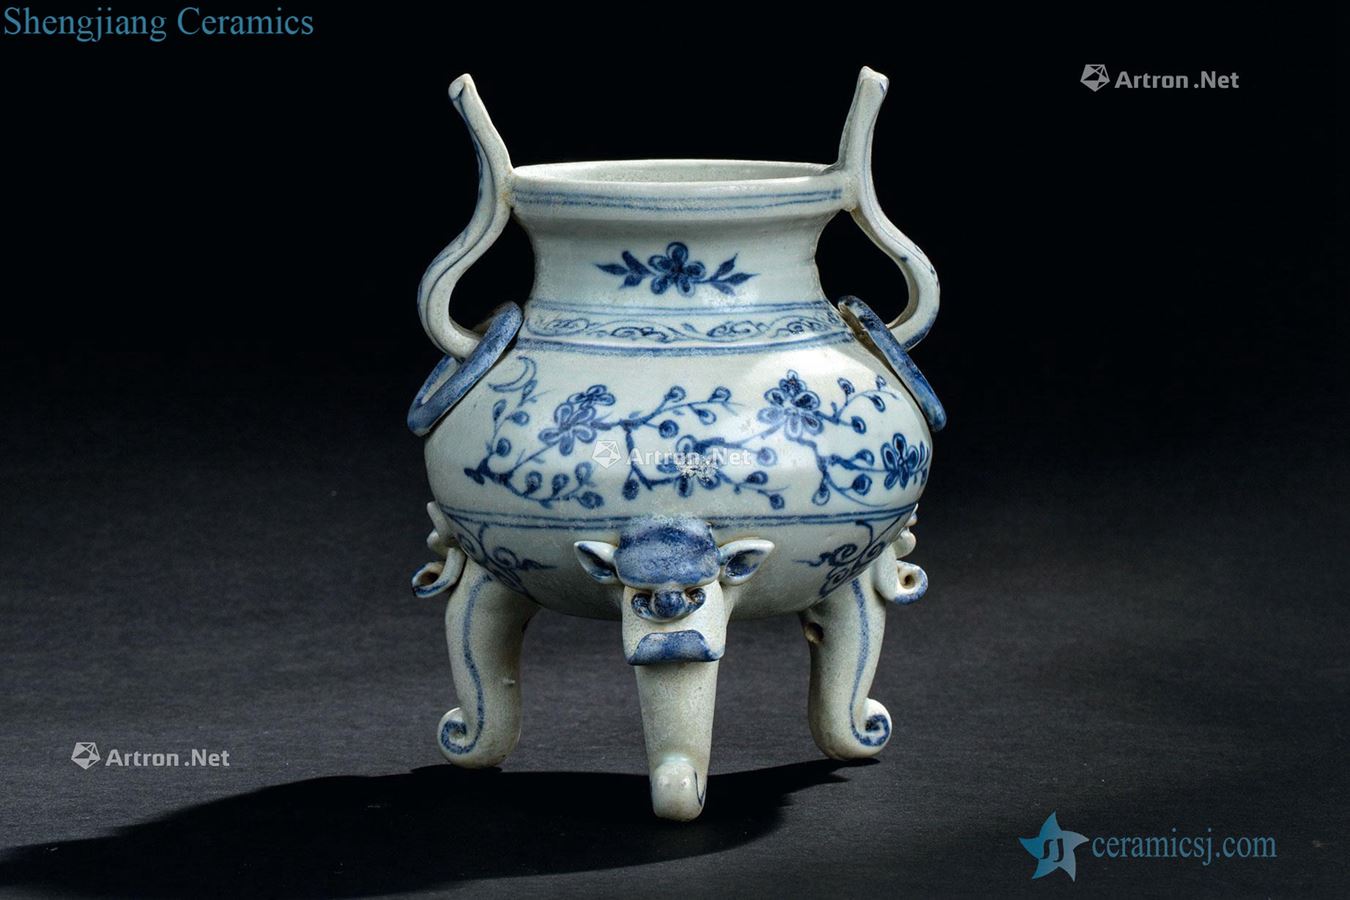 The yuan dynasty, Ming dynasty (1279-1644) blue and white plum flower grain 2-ring ear three beast foot incense burner